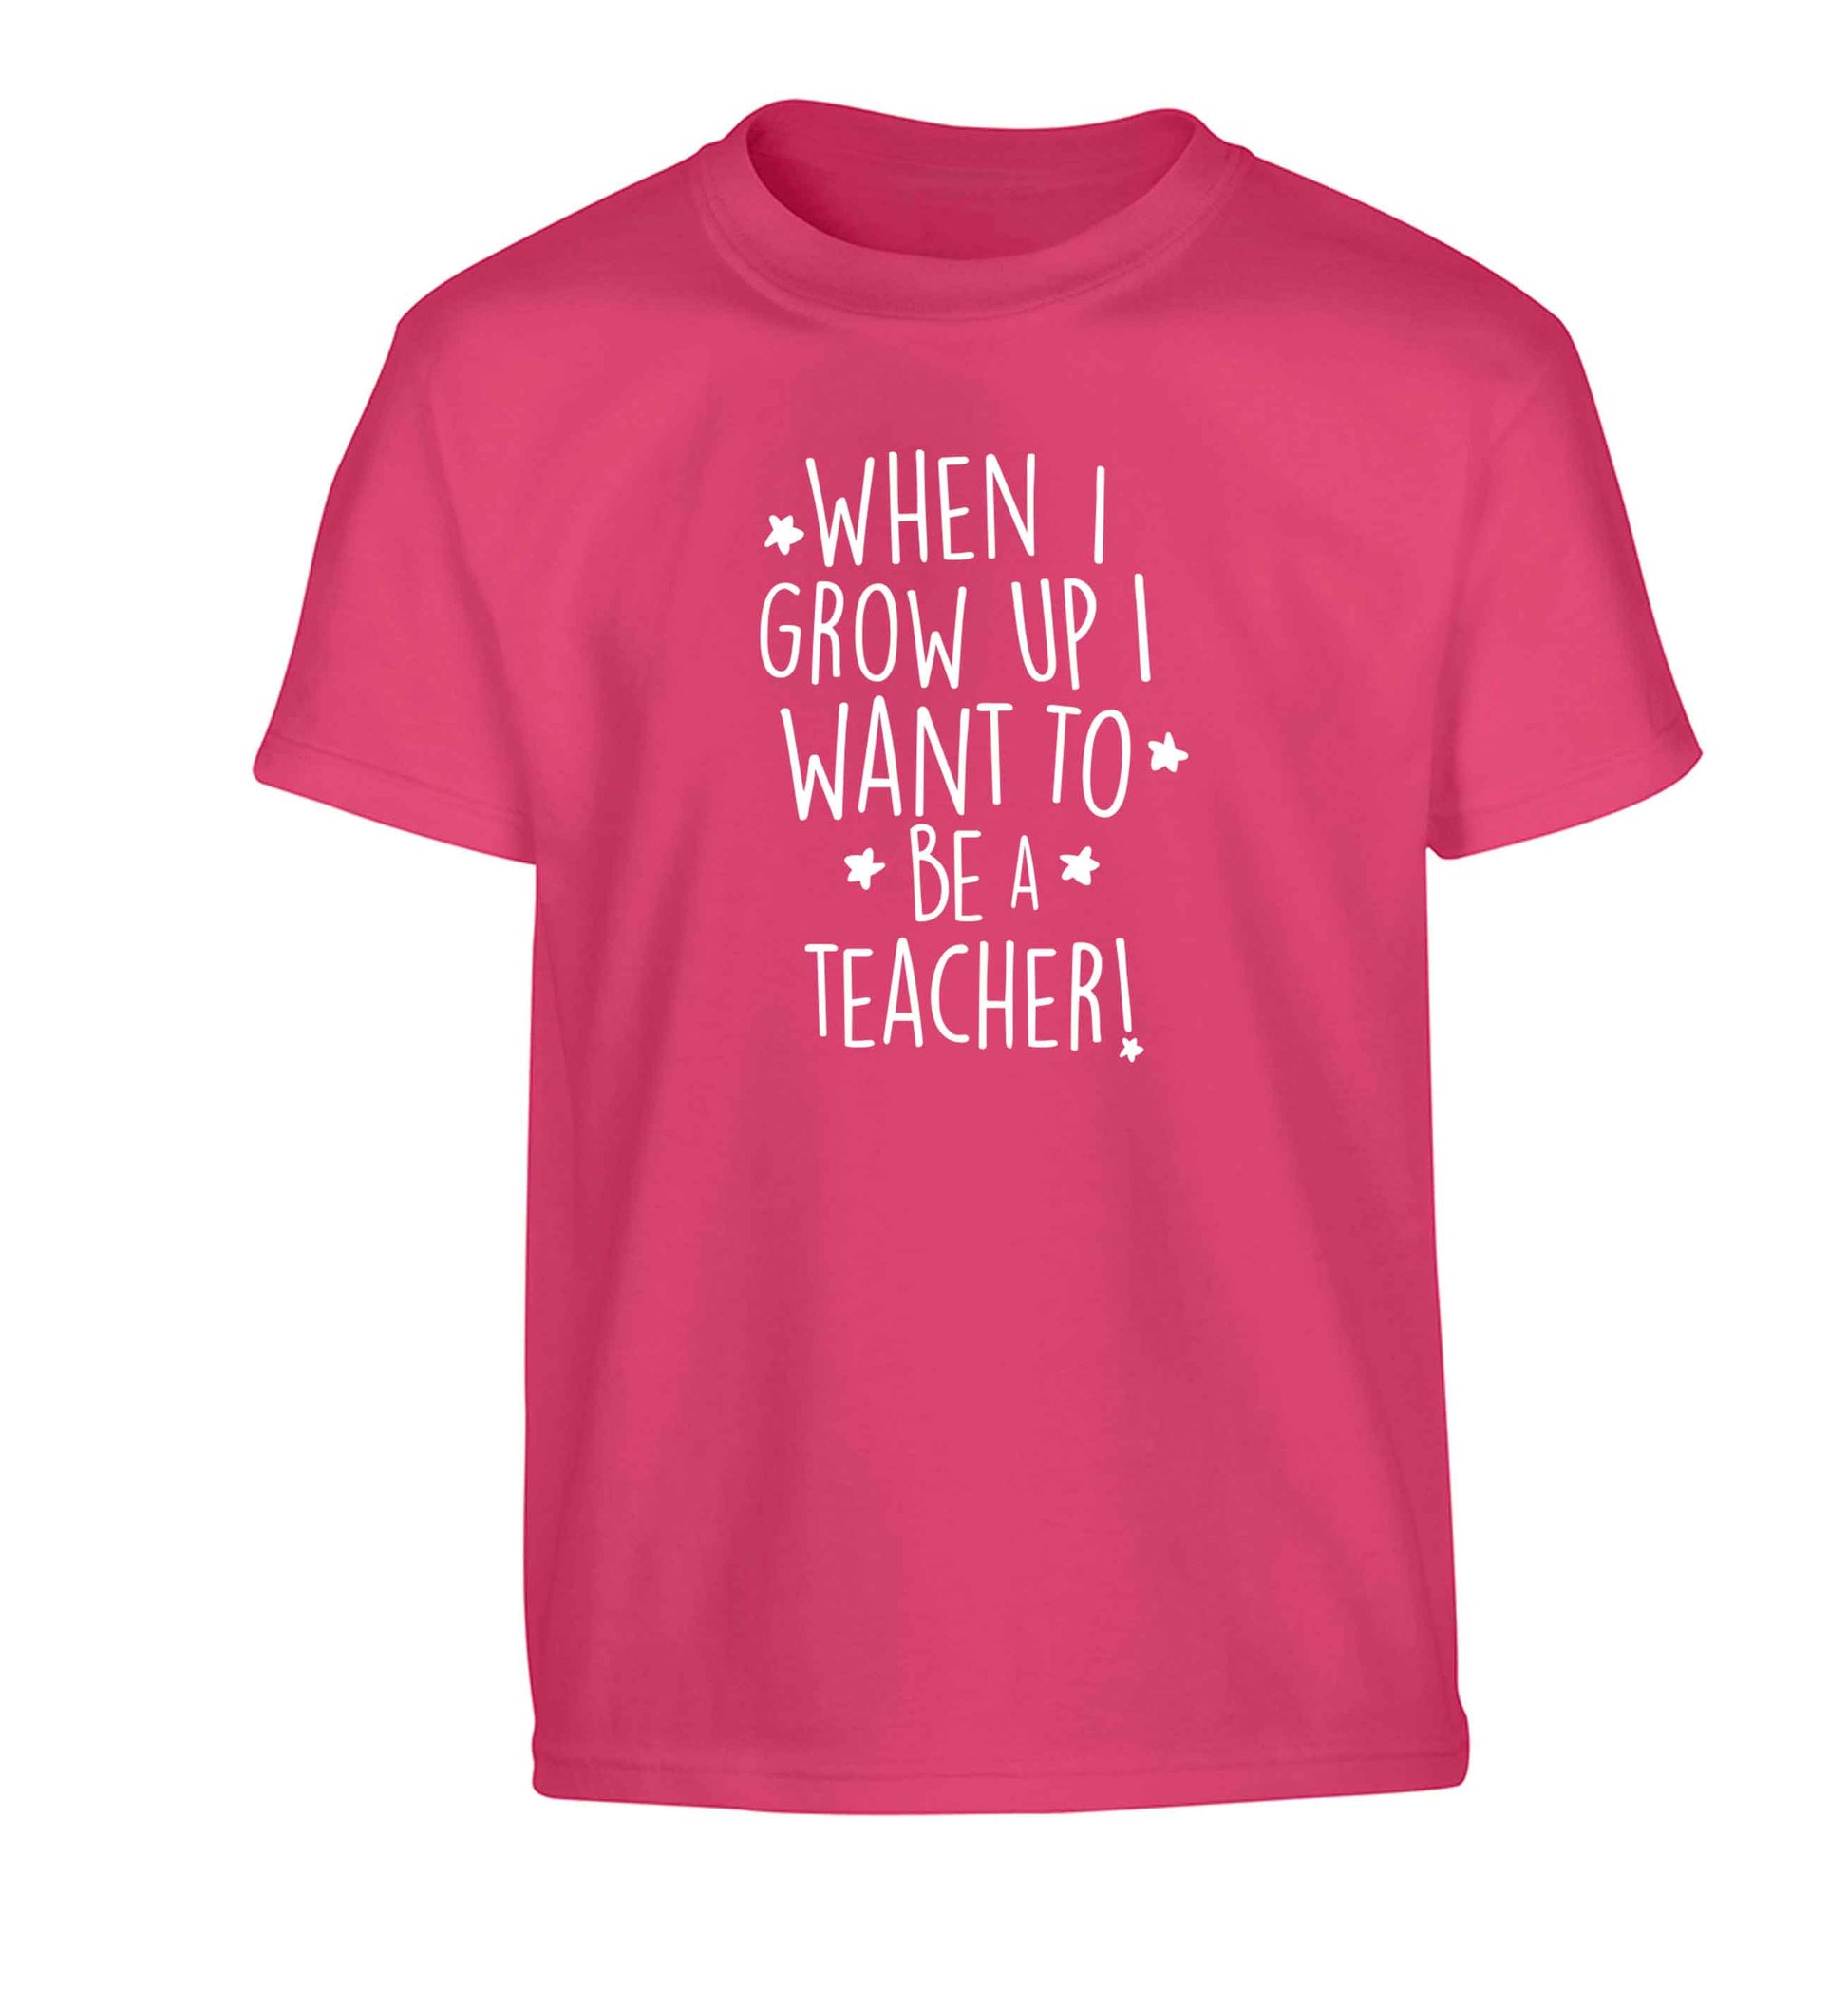 When I grow up I want to be a teacher Children's pink Tshirt 12-13 Years